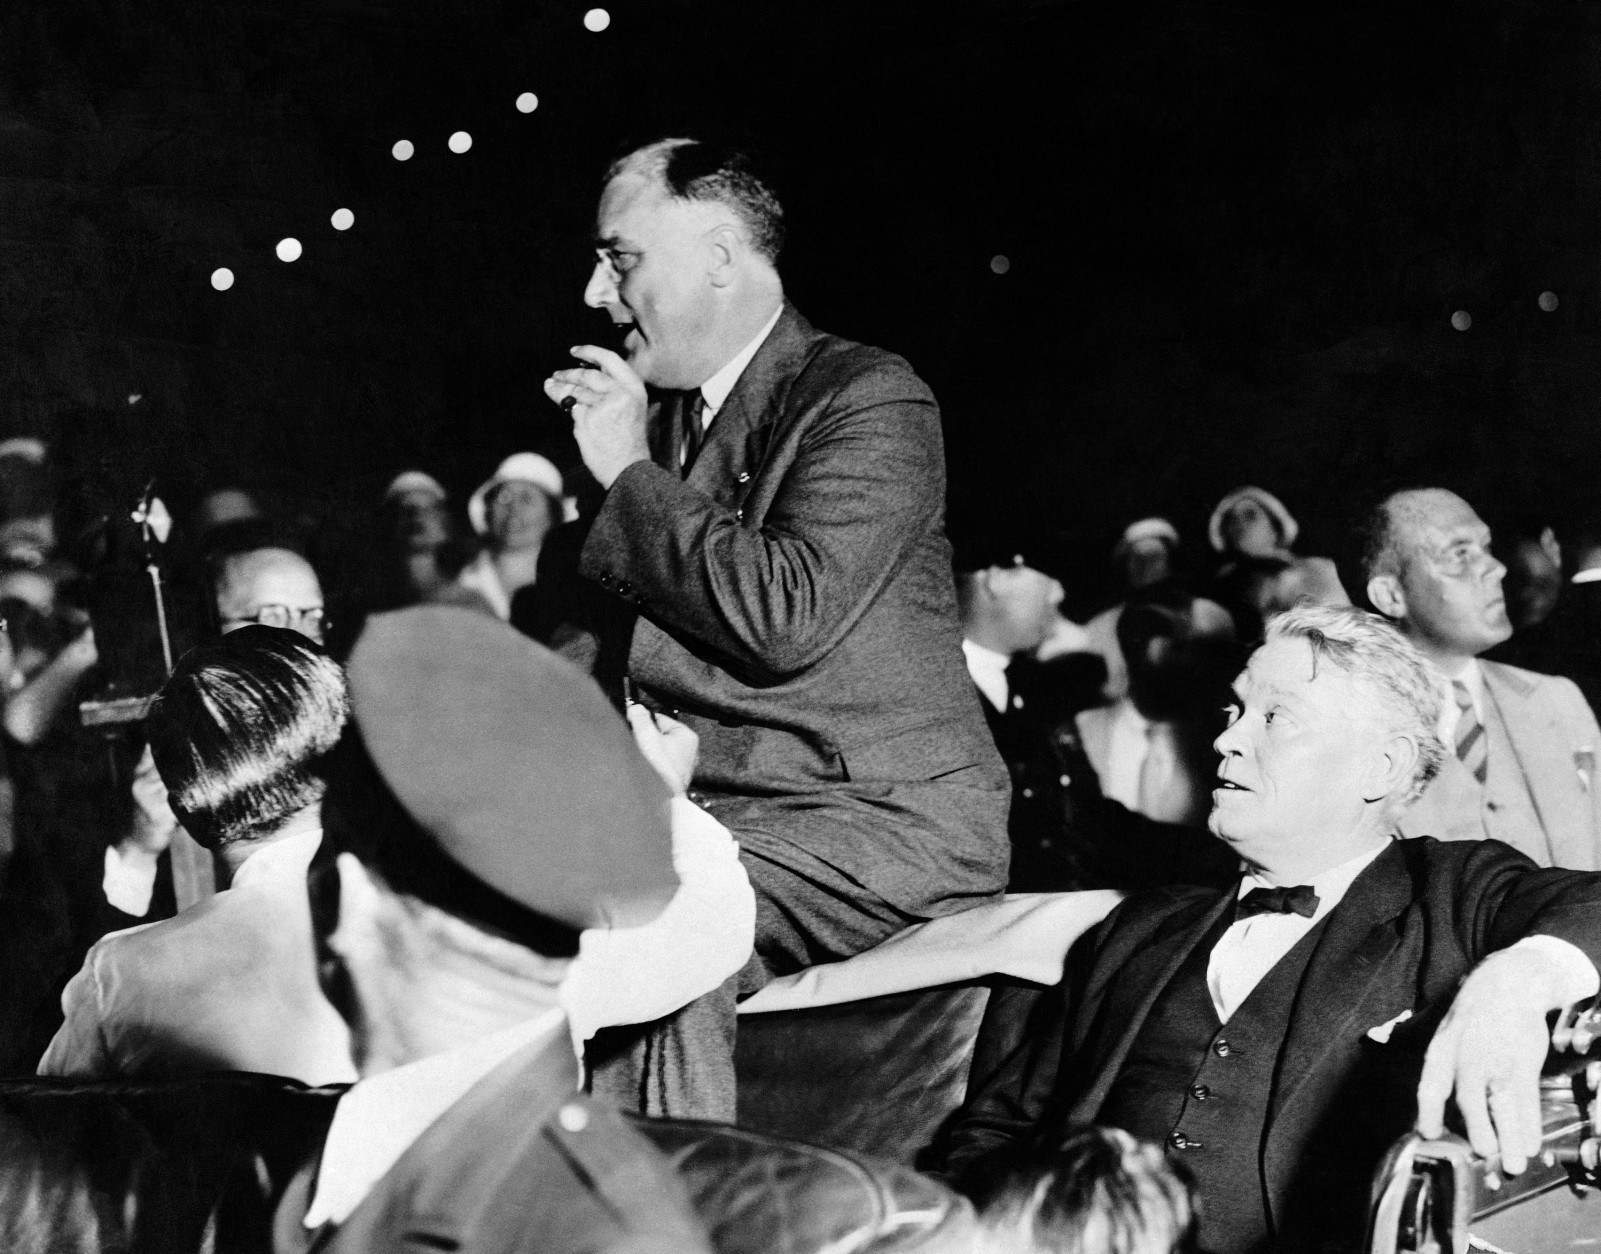 President-elect Franklin Roosevelt is shown as he assured a crowd of supporters that he had received no injury after Joe (Giuseppe) Zingara attempted to assassinate him at a public reception in Bayfront Park at Miami the night of February 15, 1933.   Zingara's bullets missed Mr. Roosevelt but struck Mayor Anton Cermak of Chicago and four other persons.  (AP Photo)